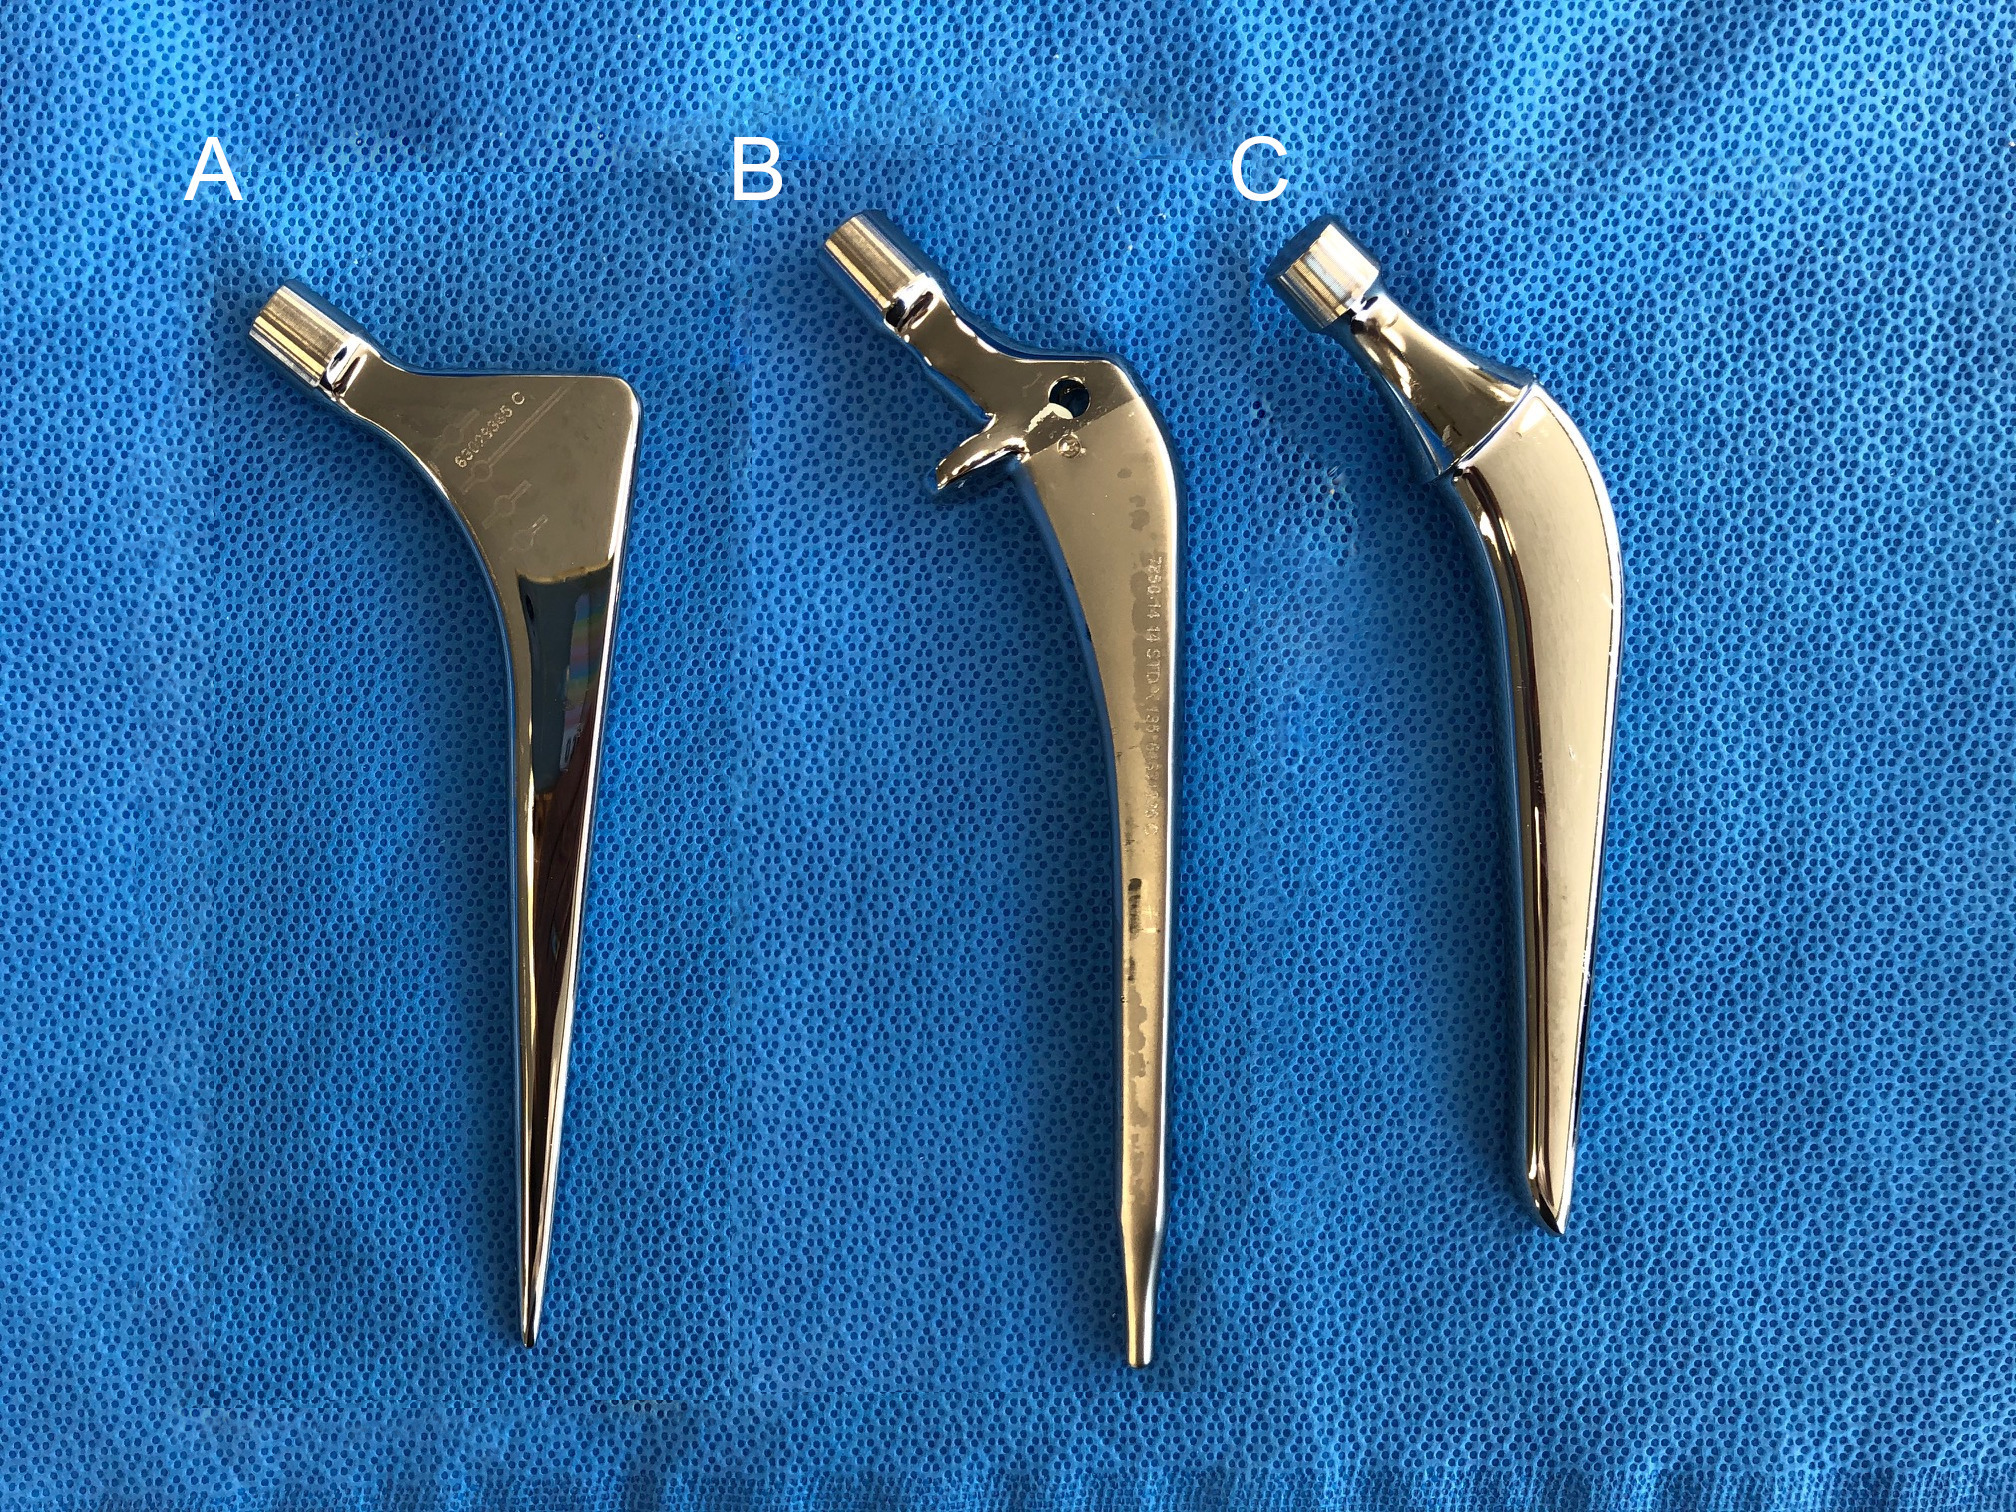 Fig. 1 
            a) The collarless polished tapered stem (Zimmer Biomet, USA), b) Versys Advocate (Zimmer Biomet), and c) Charnley-Marcel-Kerboull stem (Zimmer Biomet).
          